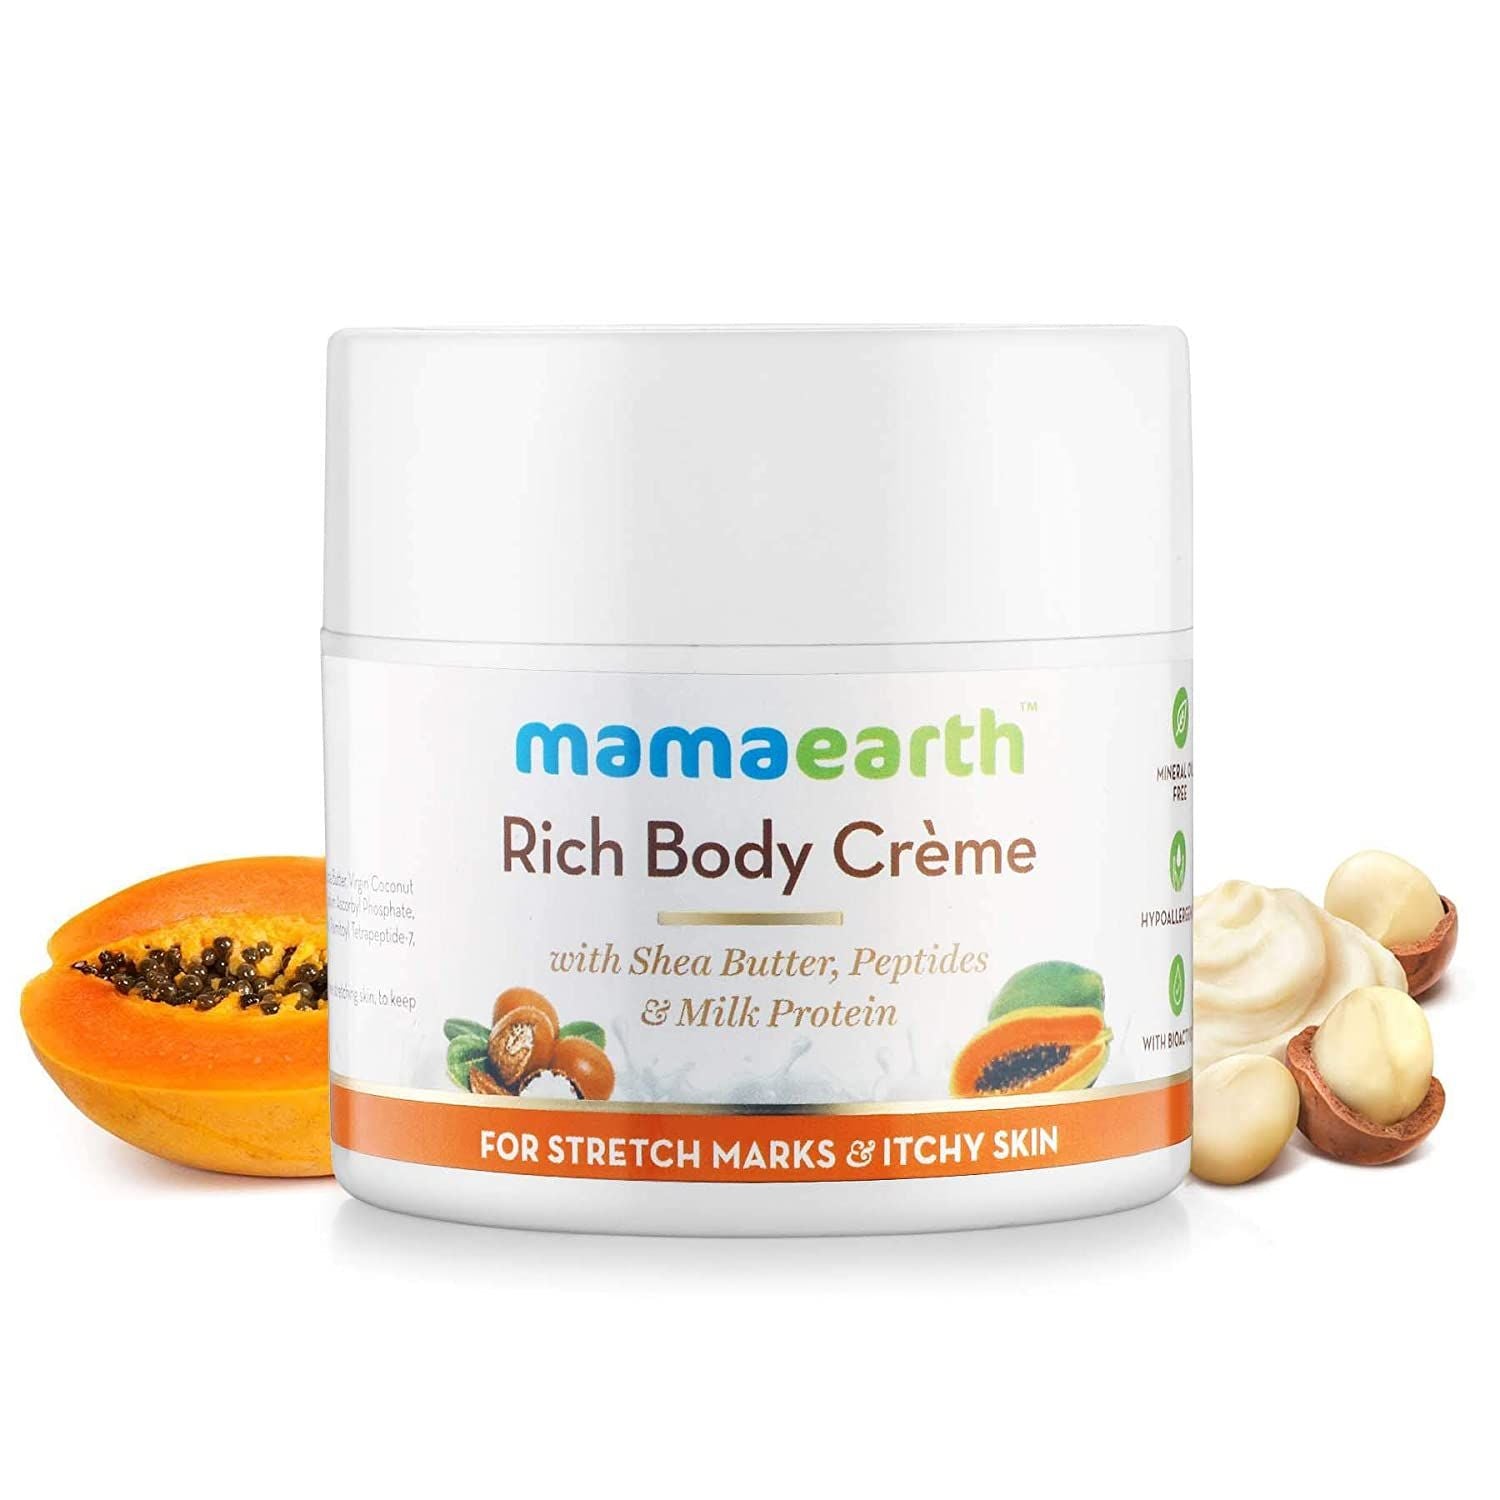 Mamaearth BT Mamaearth Body Creme for Stretch Marks 100ml